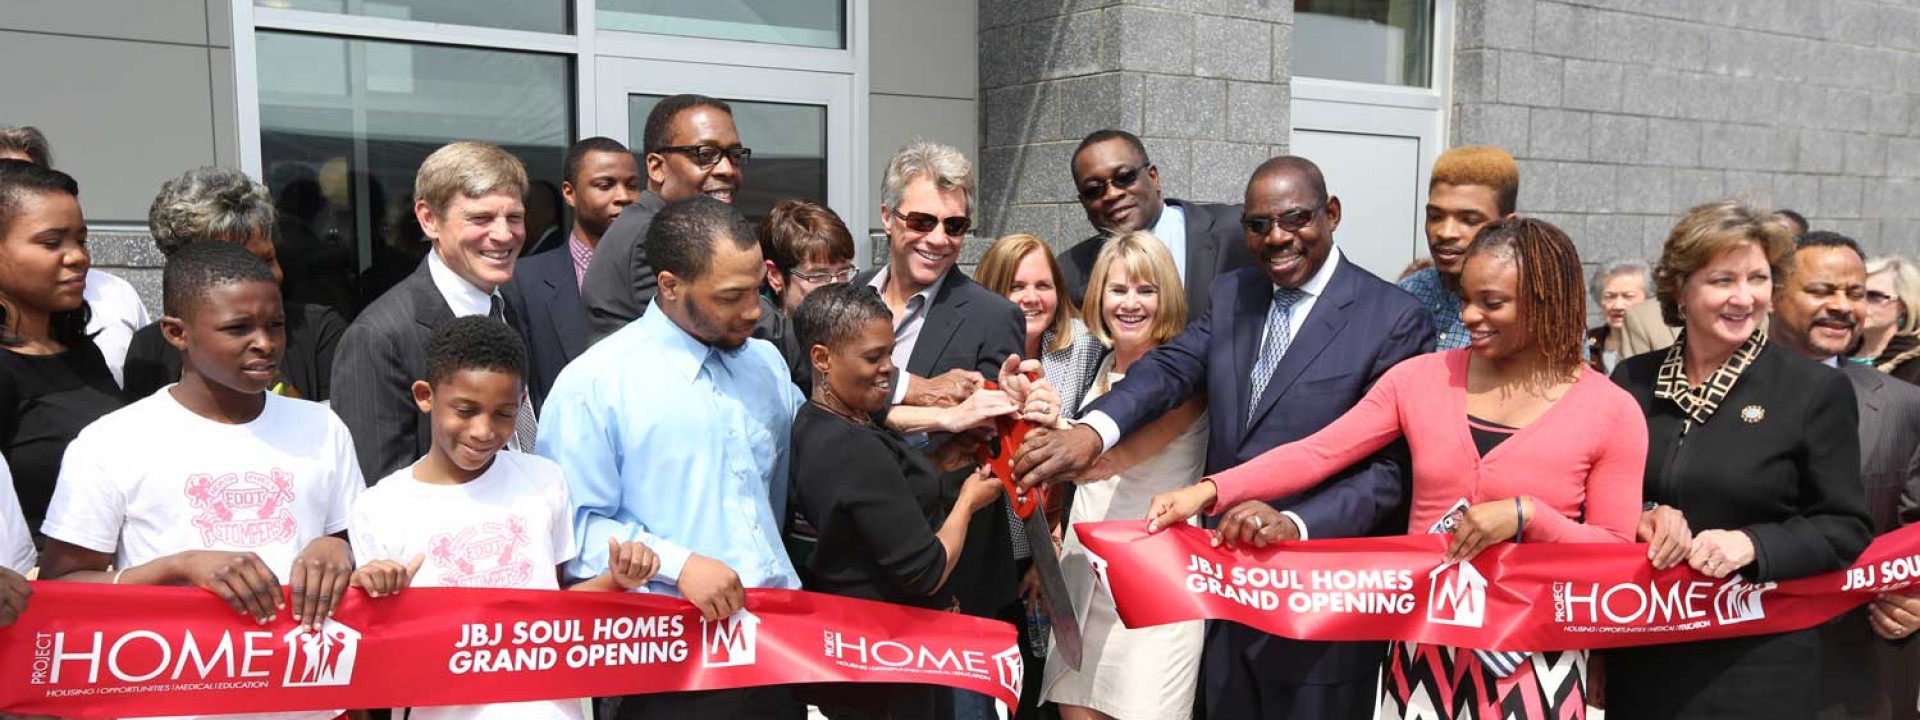 Cutting the ribbon at the grand opening celebration for Project HOME's JBJ Soul Homes, an MPOWER project